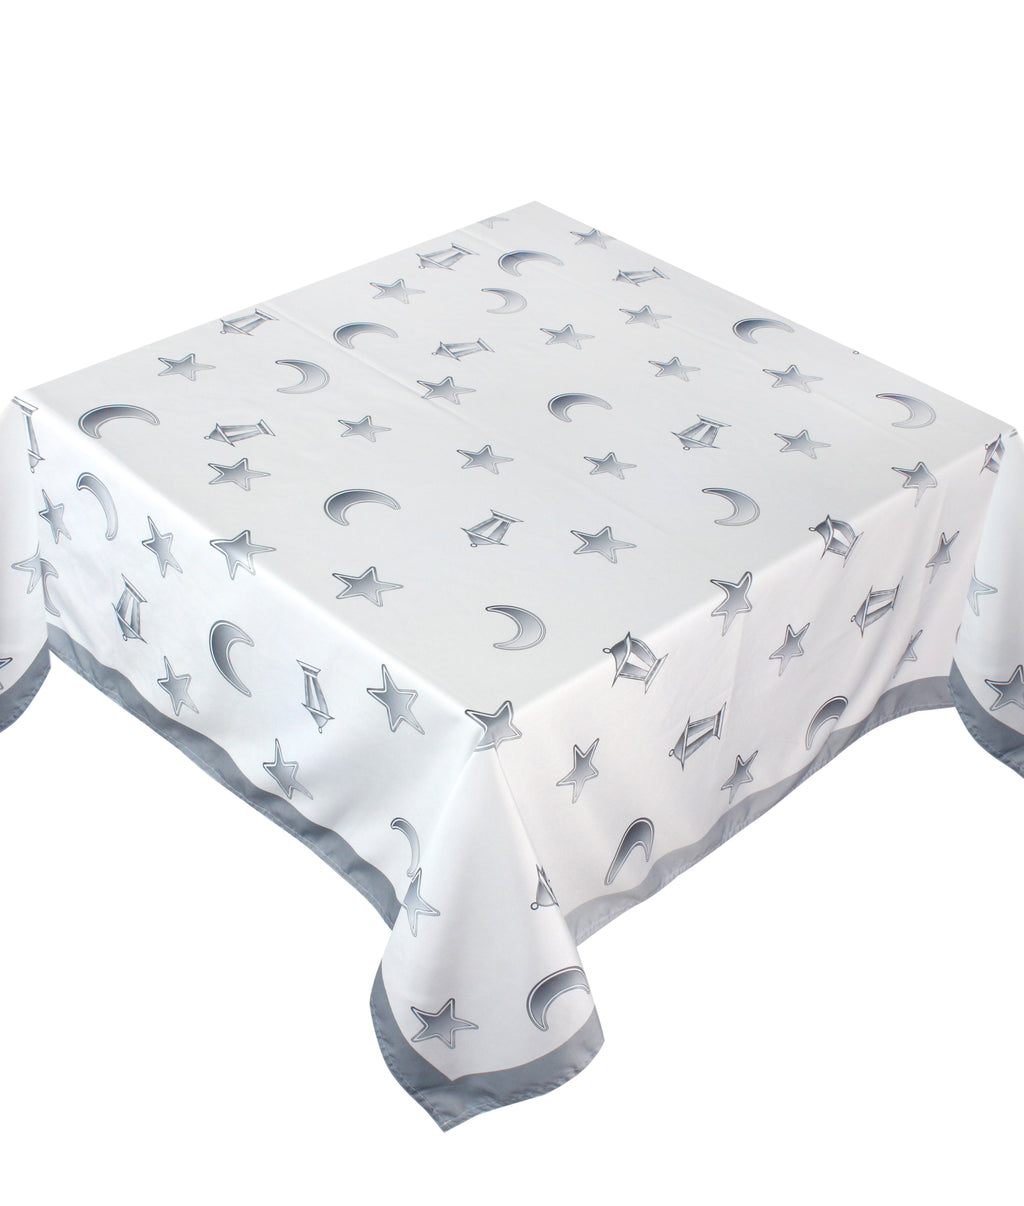 The silver stars and lanters table cover